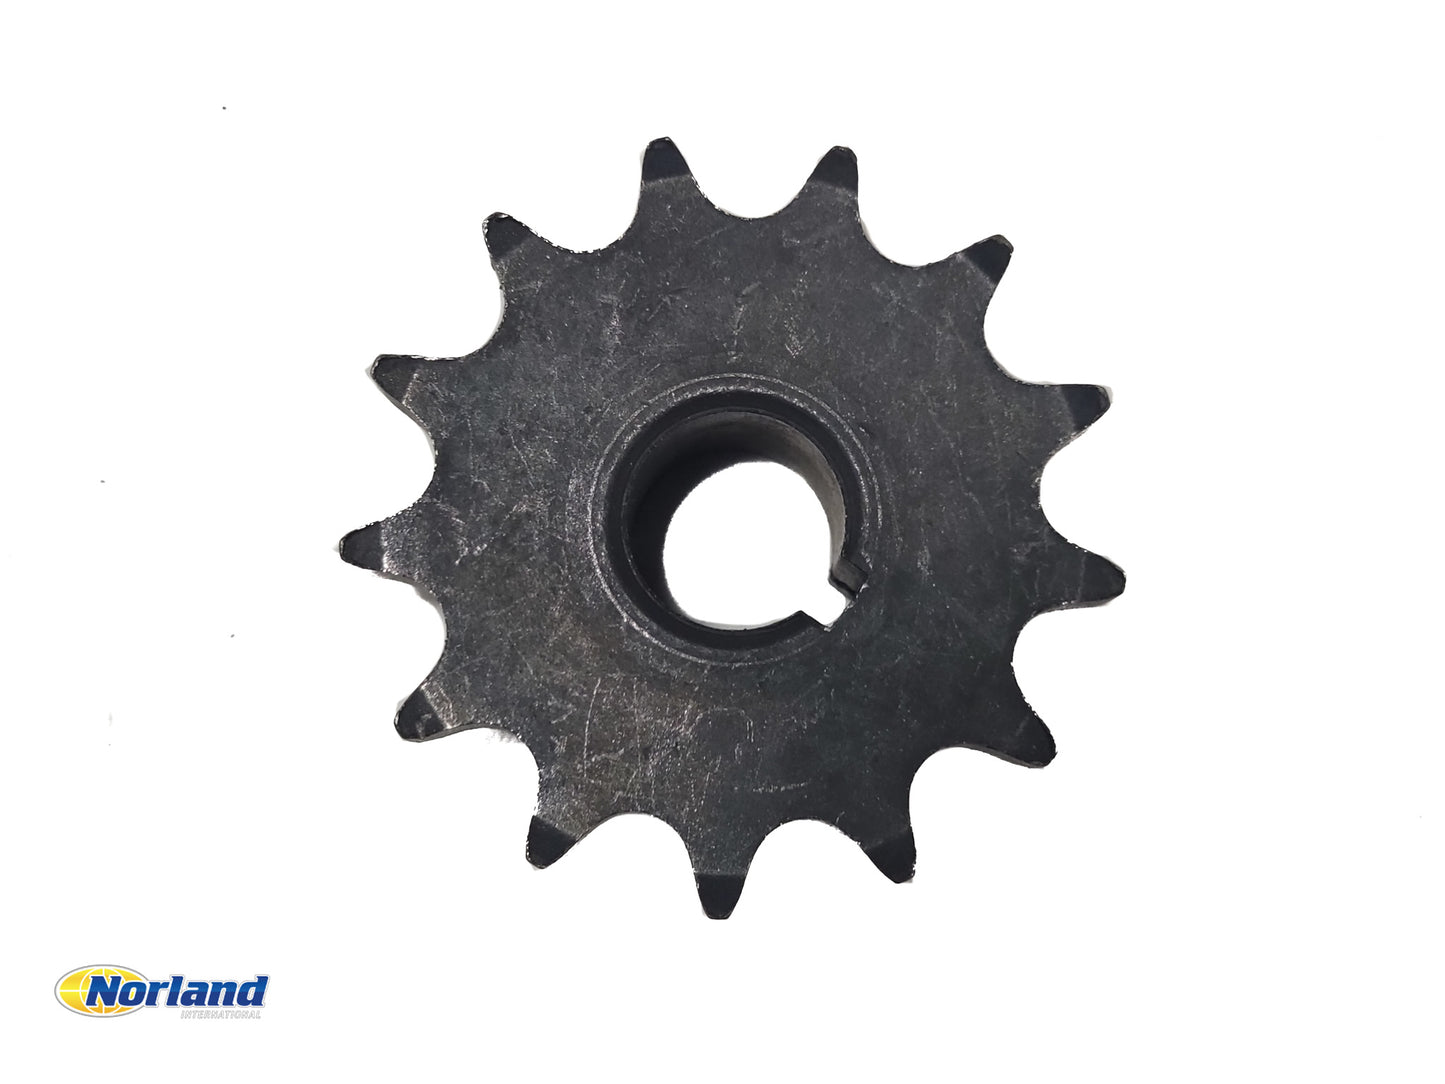 5/8" BORE, #40 CHAIN, 13 Tooth Sprocket